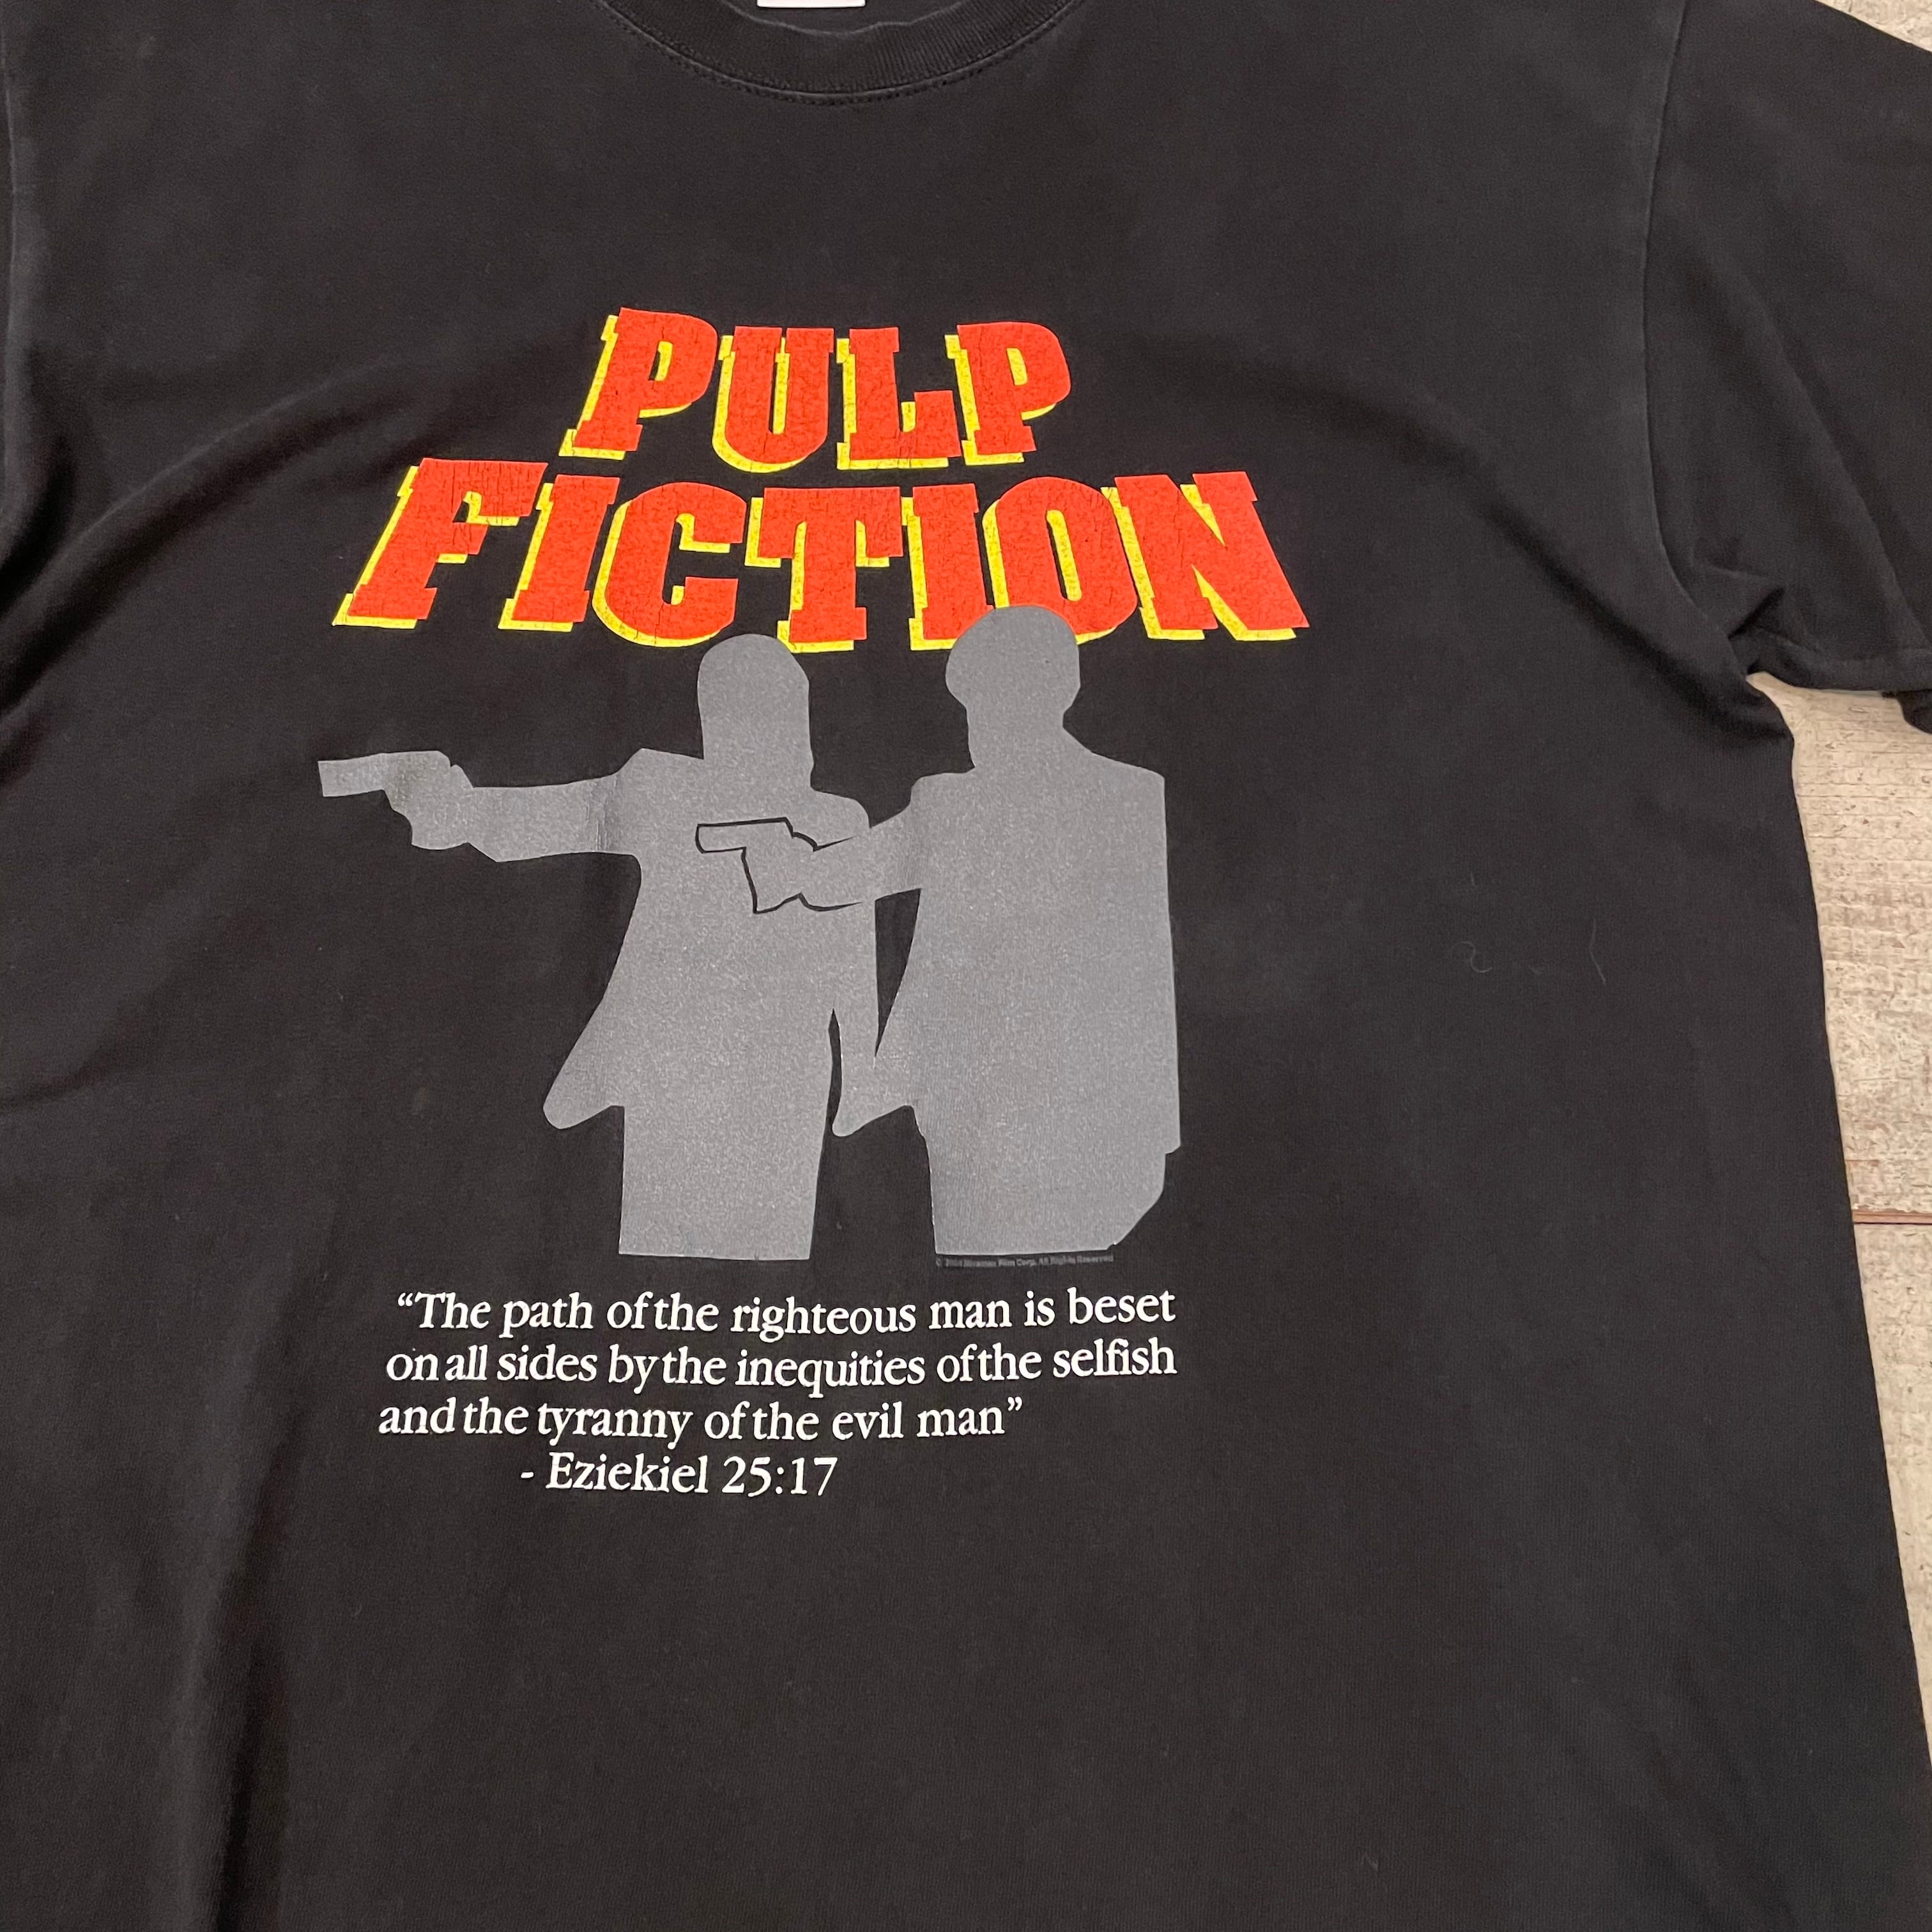 00s pulp fiction tee | What'z up